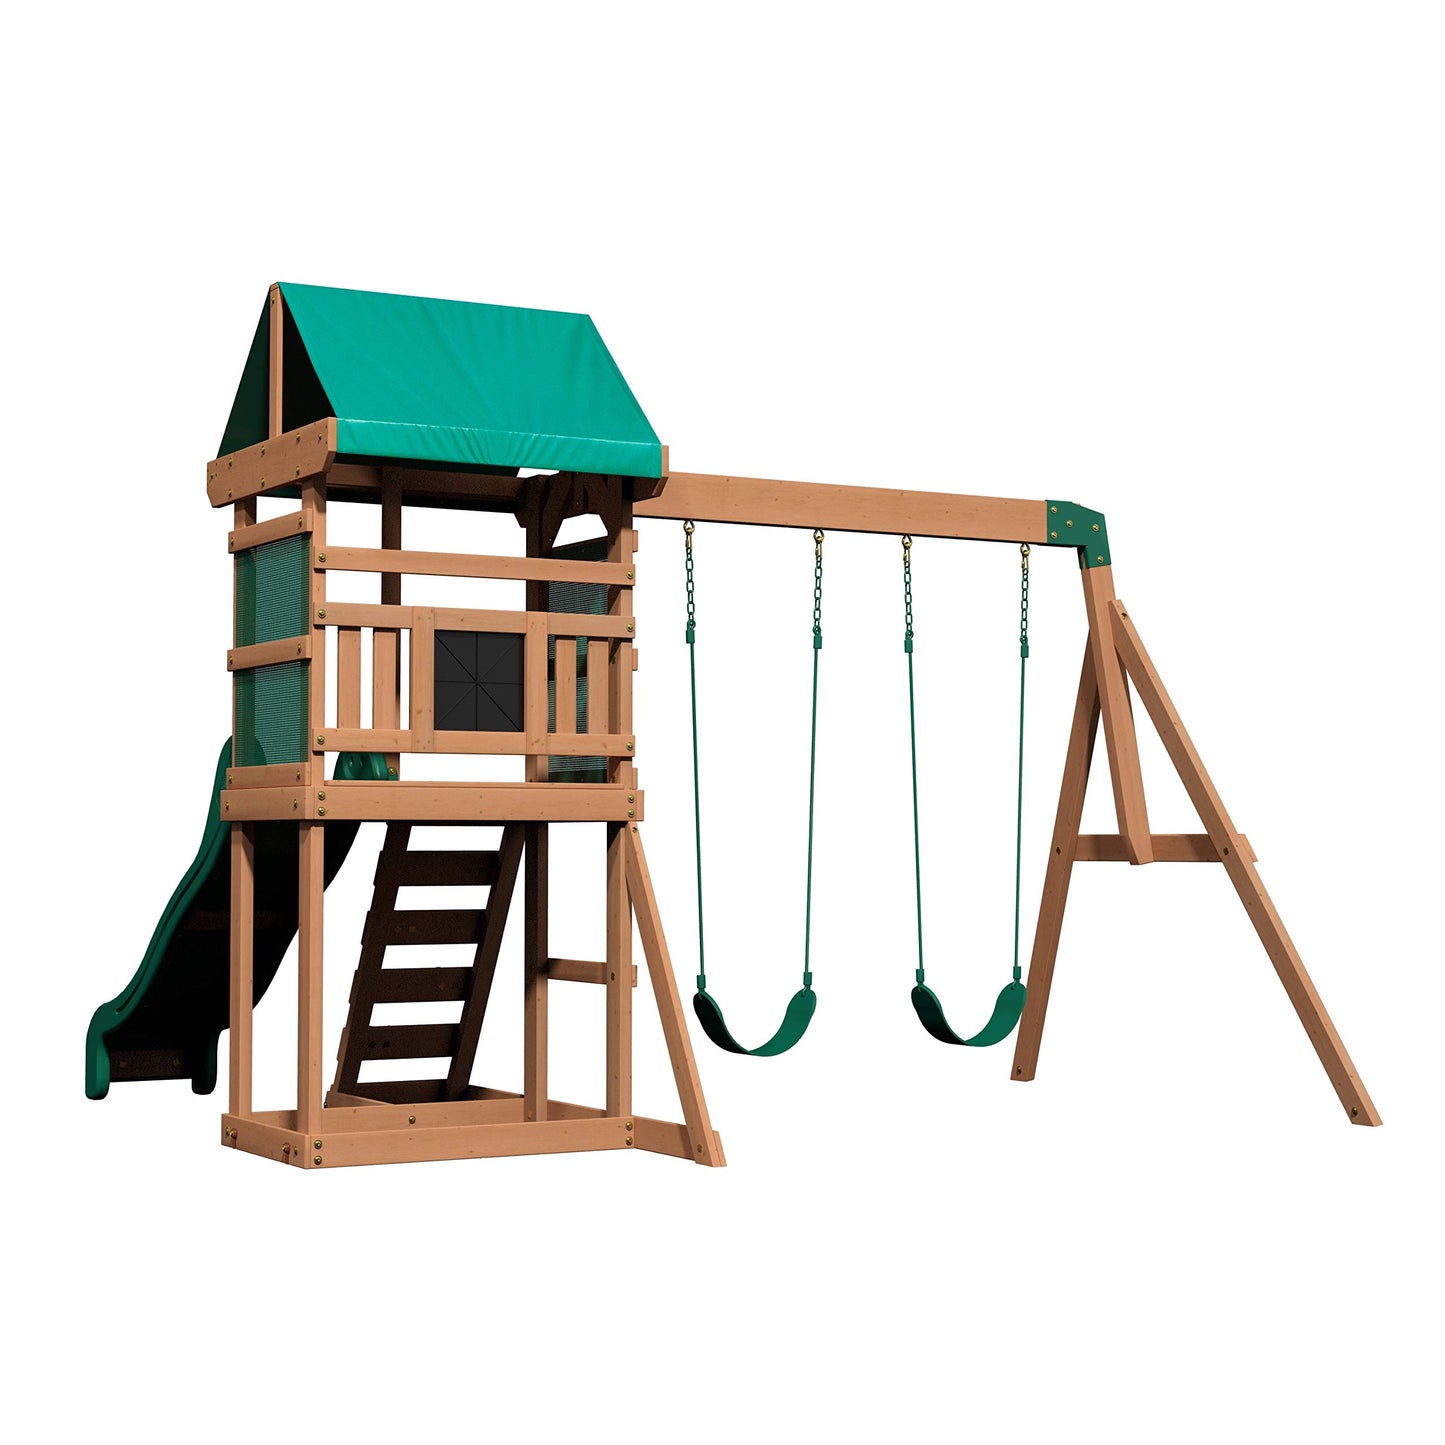 Backyard Discovery Buckley Hill Wooden Swing Set, Made for Small Yards and Younger Children, Two Belt Swings, Covered Mesh Fort with Canopy, Rock Climber Wall, 6 ft Slide Green - Like New